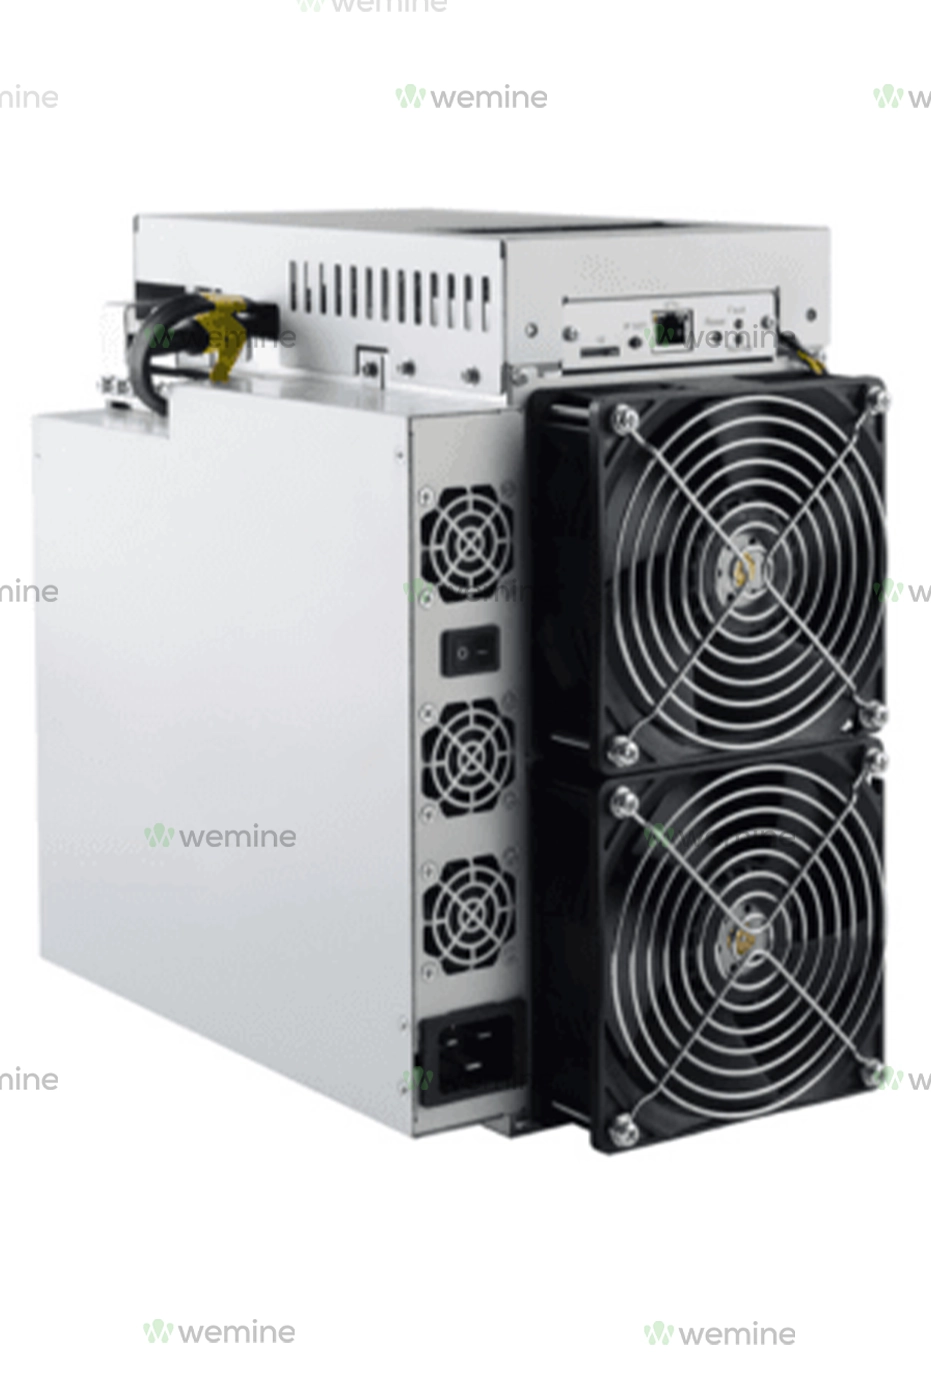 A cryptocurrency mining rig featuring a metallic casing with dual large, circular cooling fans on one side, designed for effective heat dissipation during operation.